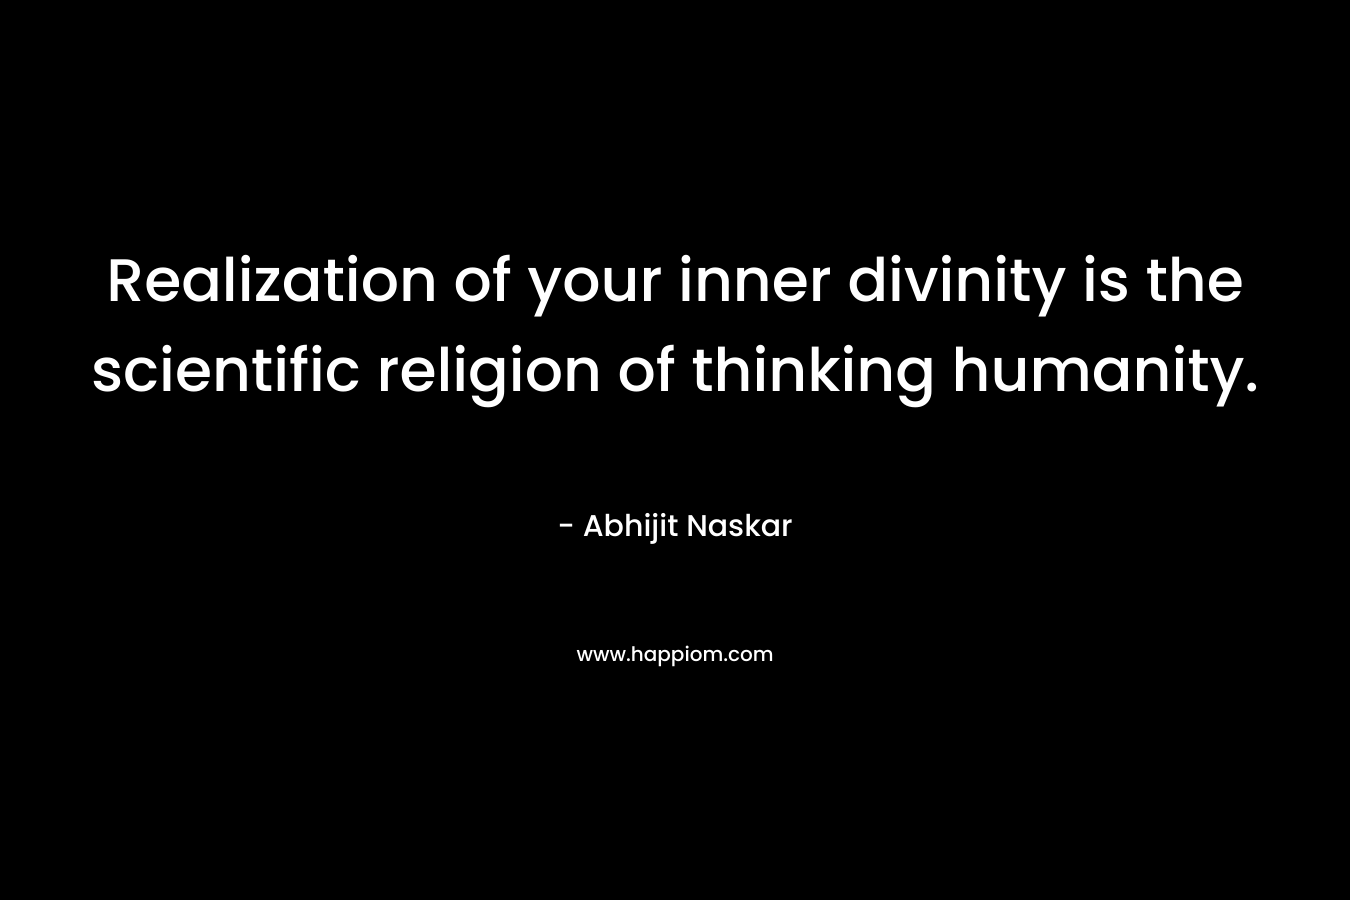 Realization of your inner divinity is the scientific religion of thinking humanity.